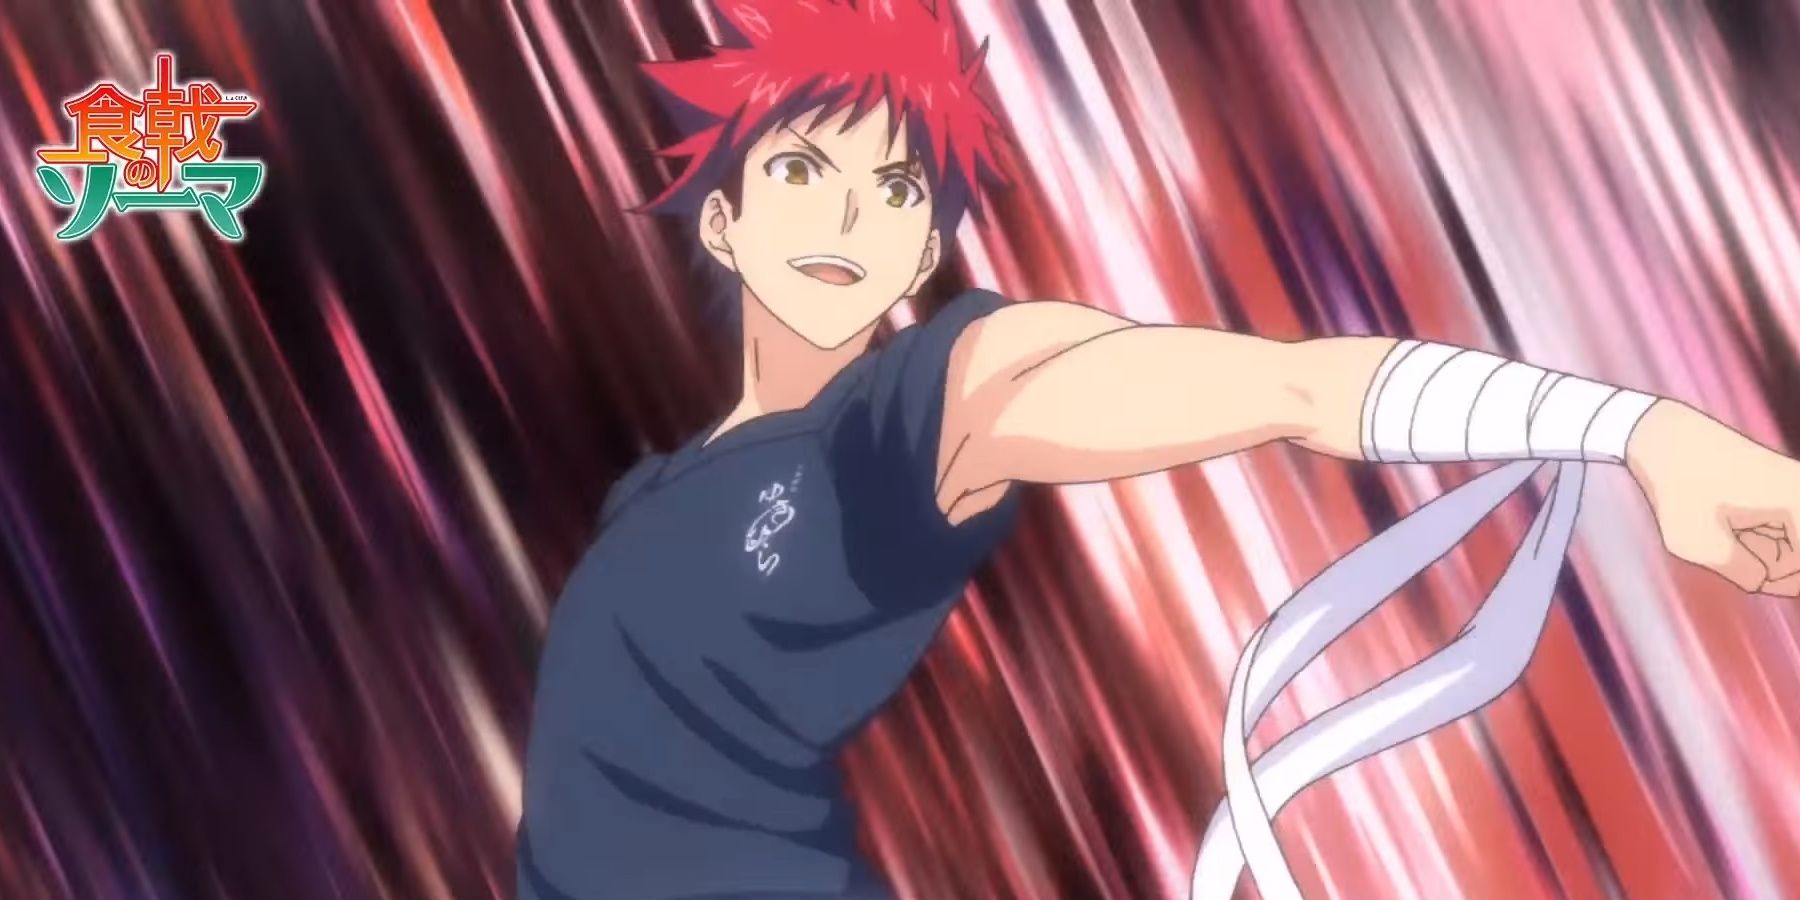 How Food Wars! Could Have Saved Itself From Going Stale